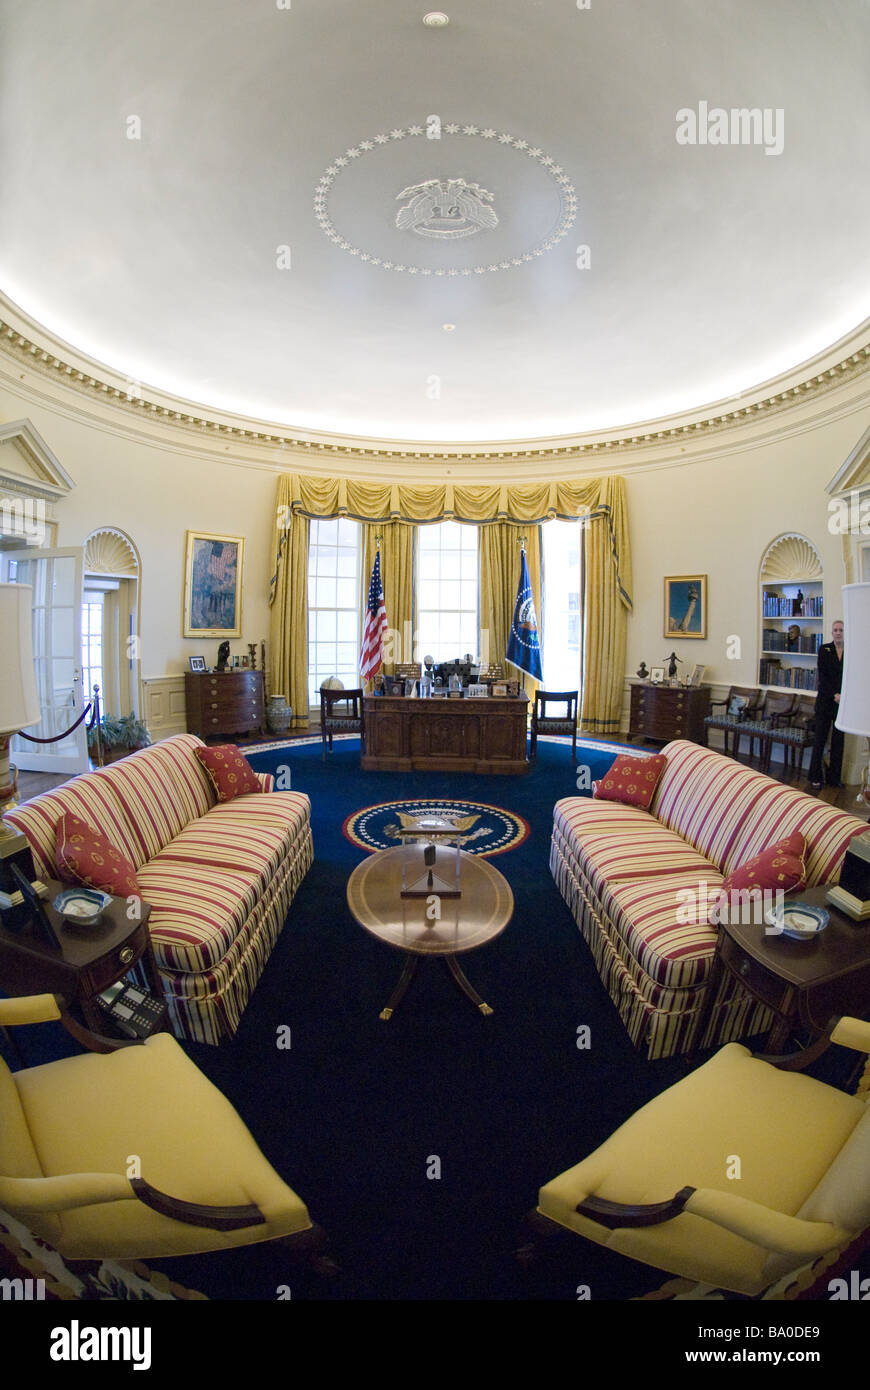 Oval Office der William J. Clinton Presidential Library and Museum in Little Rock, Arkansas. Stockfoto